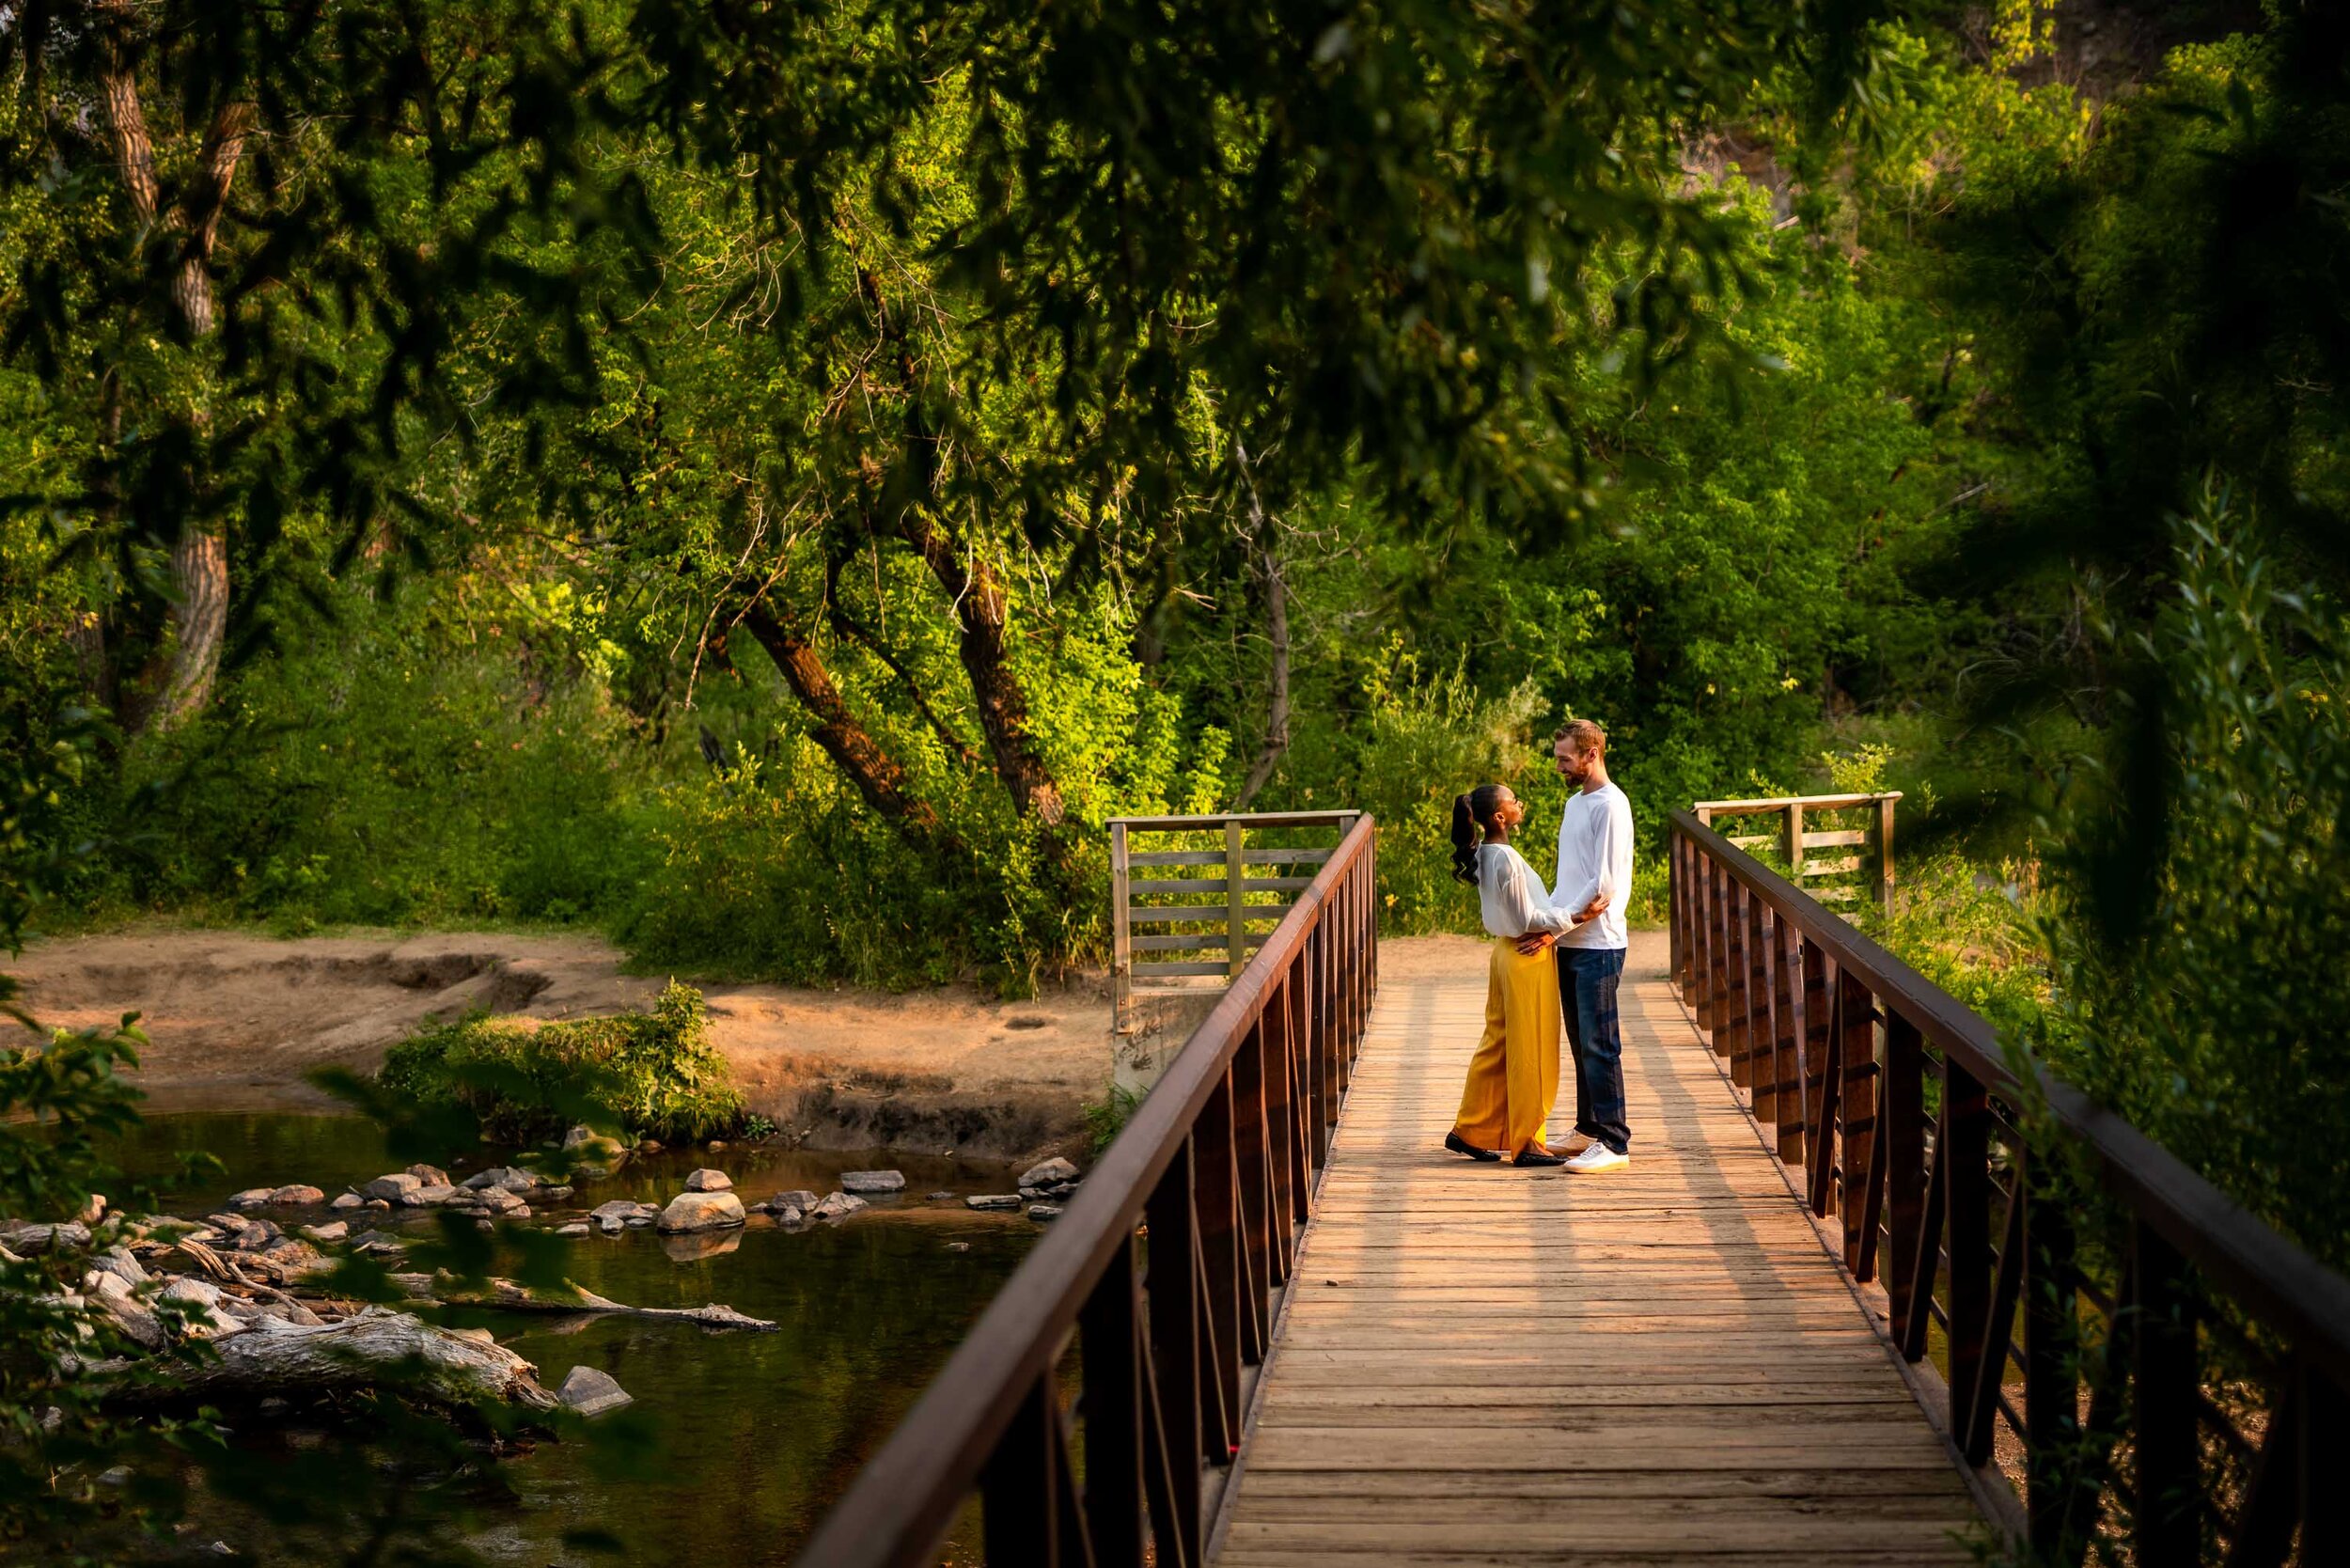 Engaged couple poses for engagement photos at Lair o' the Bear Park in Morrison, Colorado, Engagement Session, Engagement Photos, Engagement Photos Inspiration, Engagement Photography, Engagement Photographer, Lair o' the Bear,  Morrison Engagement Photos, Morrison engagement photos, Morrison engagement photographer, Colorado engagement photos, Colorado engagement photography, Colorado engagement photographer, Colorado engagement inspiration